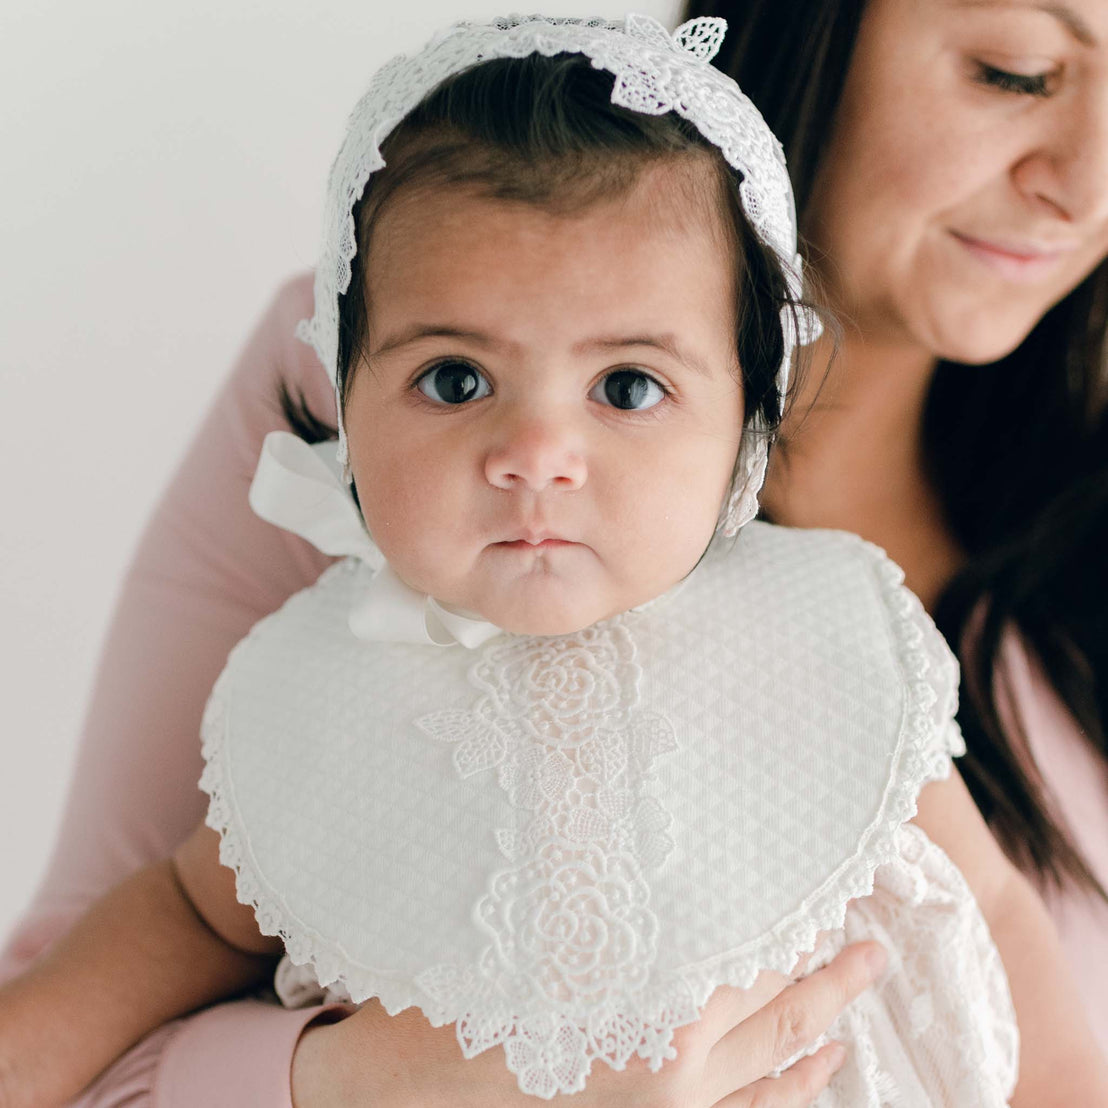 A woman holding a baby girl wearing a Juliette Bib and handcrafted white lace bonnet, both looking directly at the camera with a soft white background.